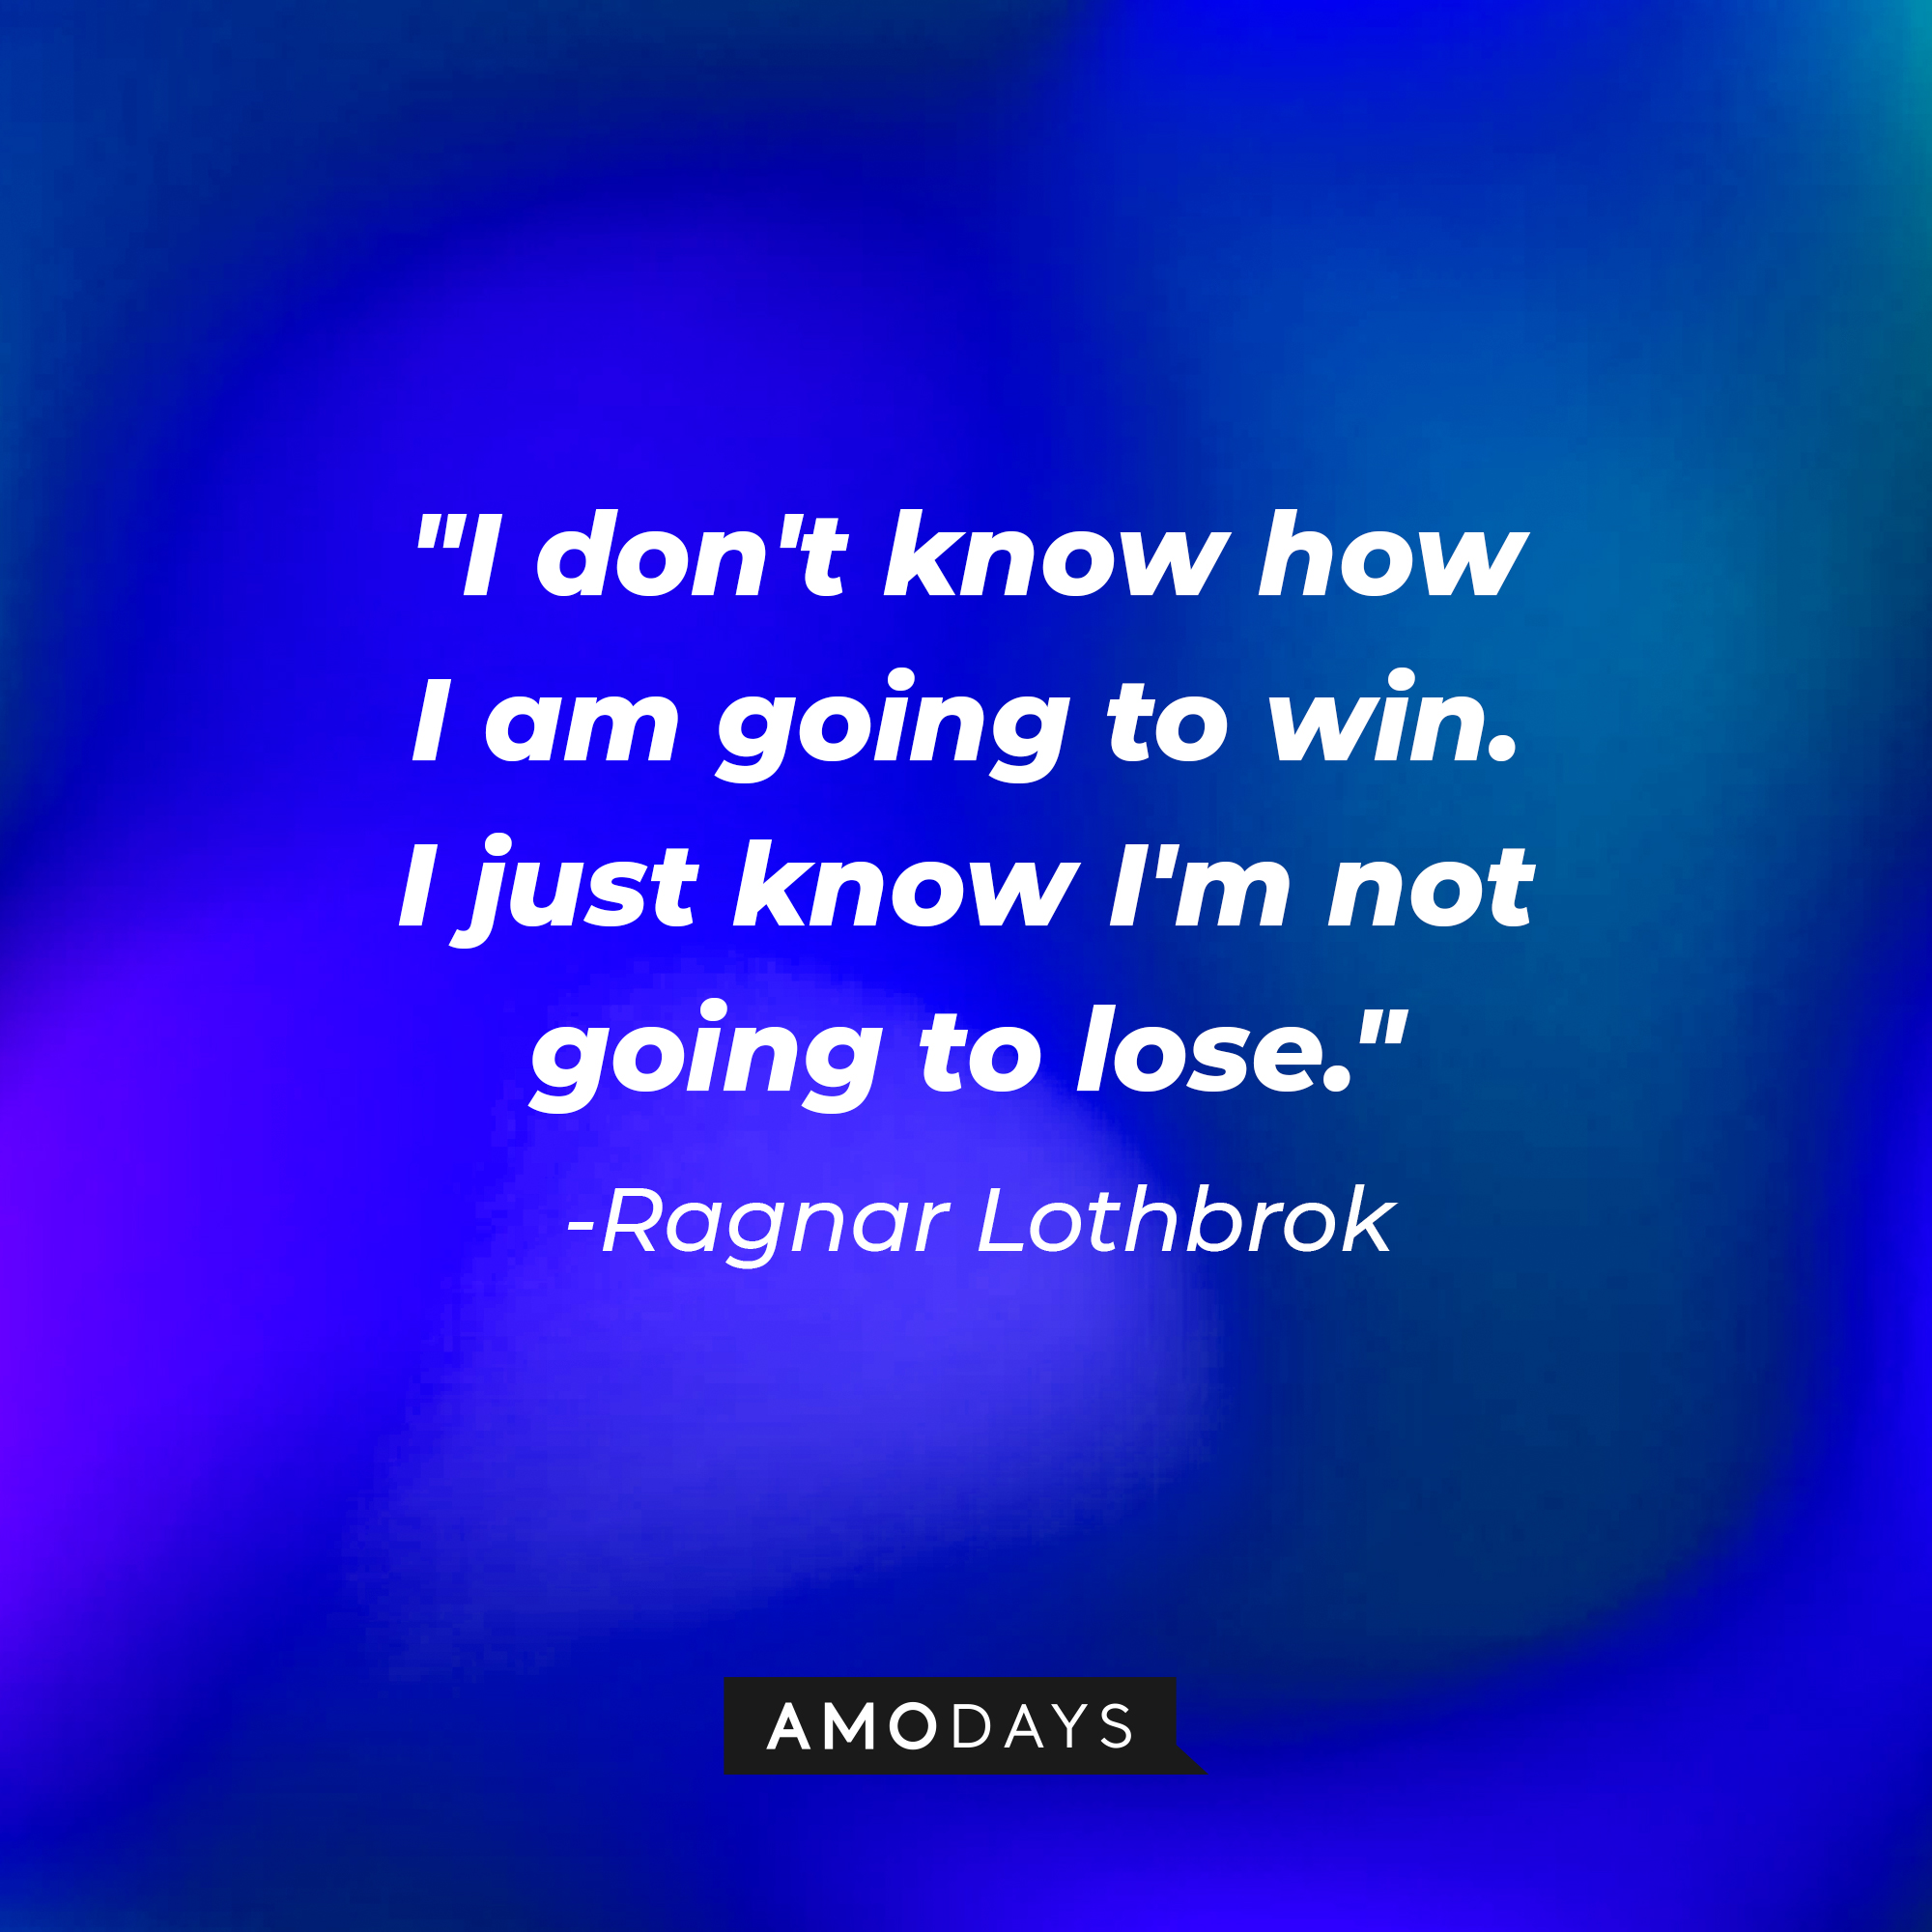 Ragnar Lothbrok's quote: "I don't know how I am going to win. I just know I'm not going to lose." | Source: Amodays